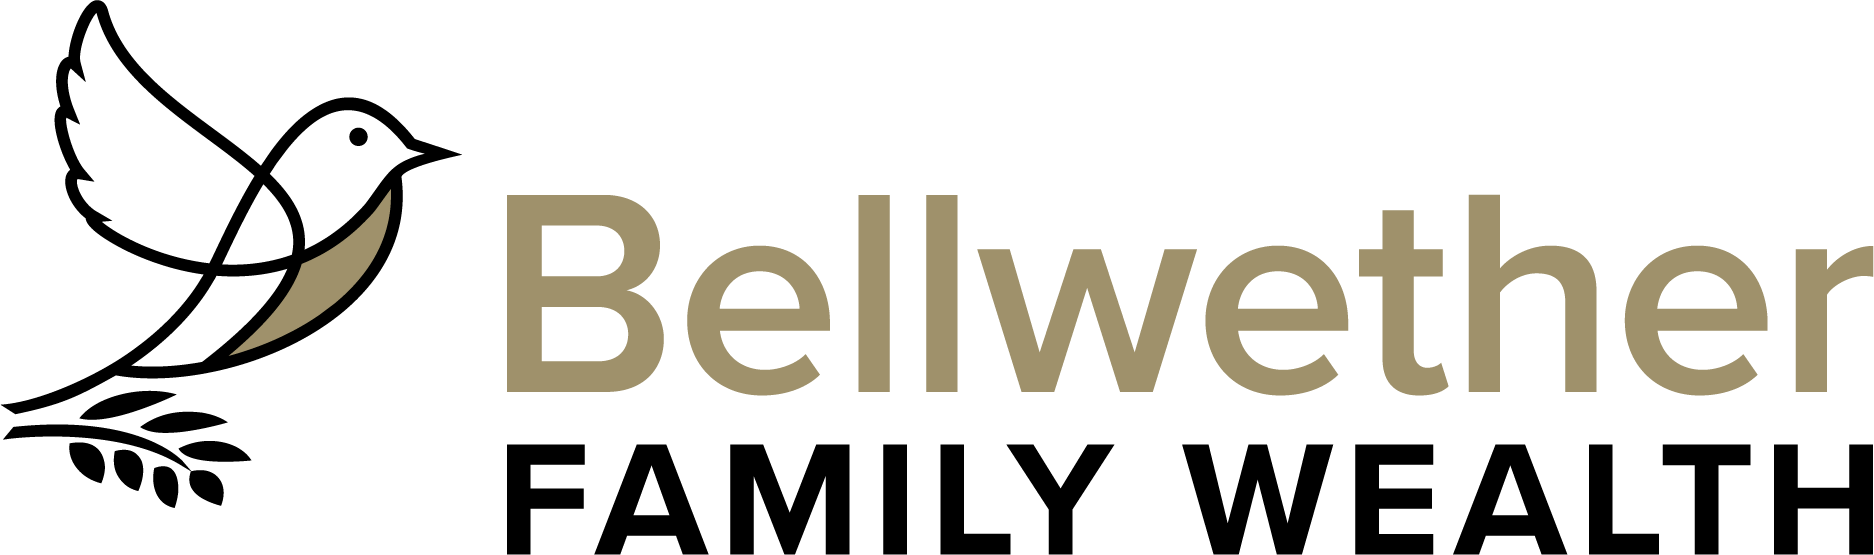 Bellwether Family Wealth